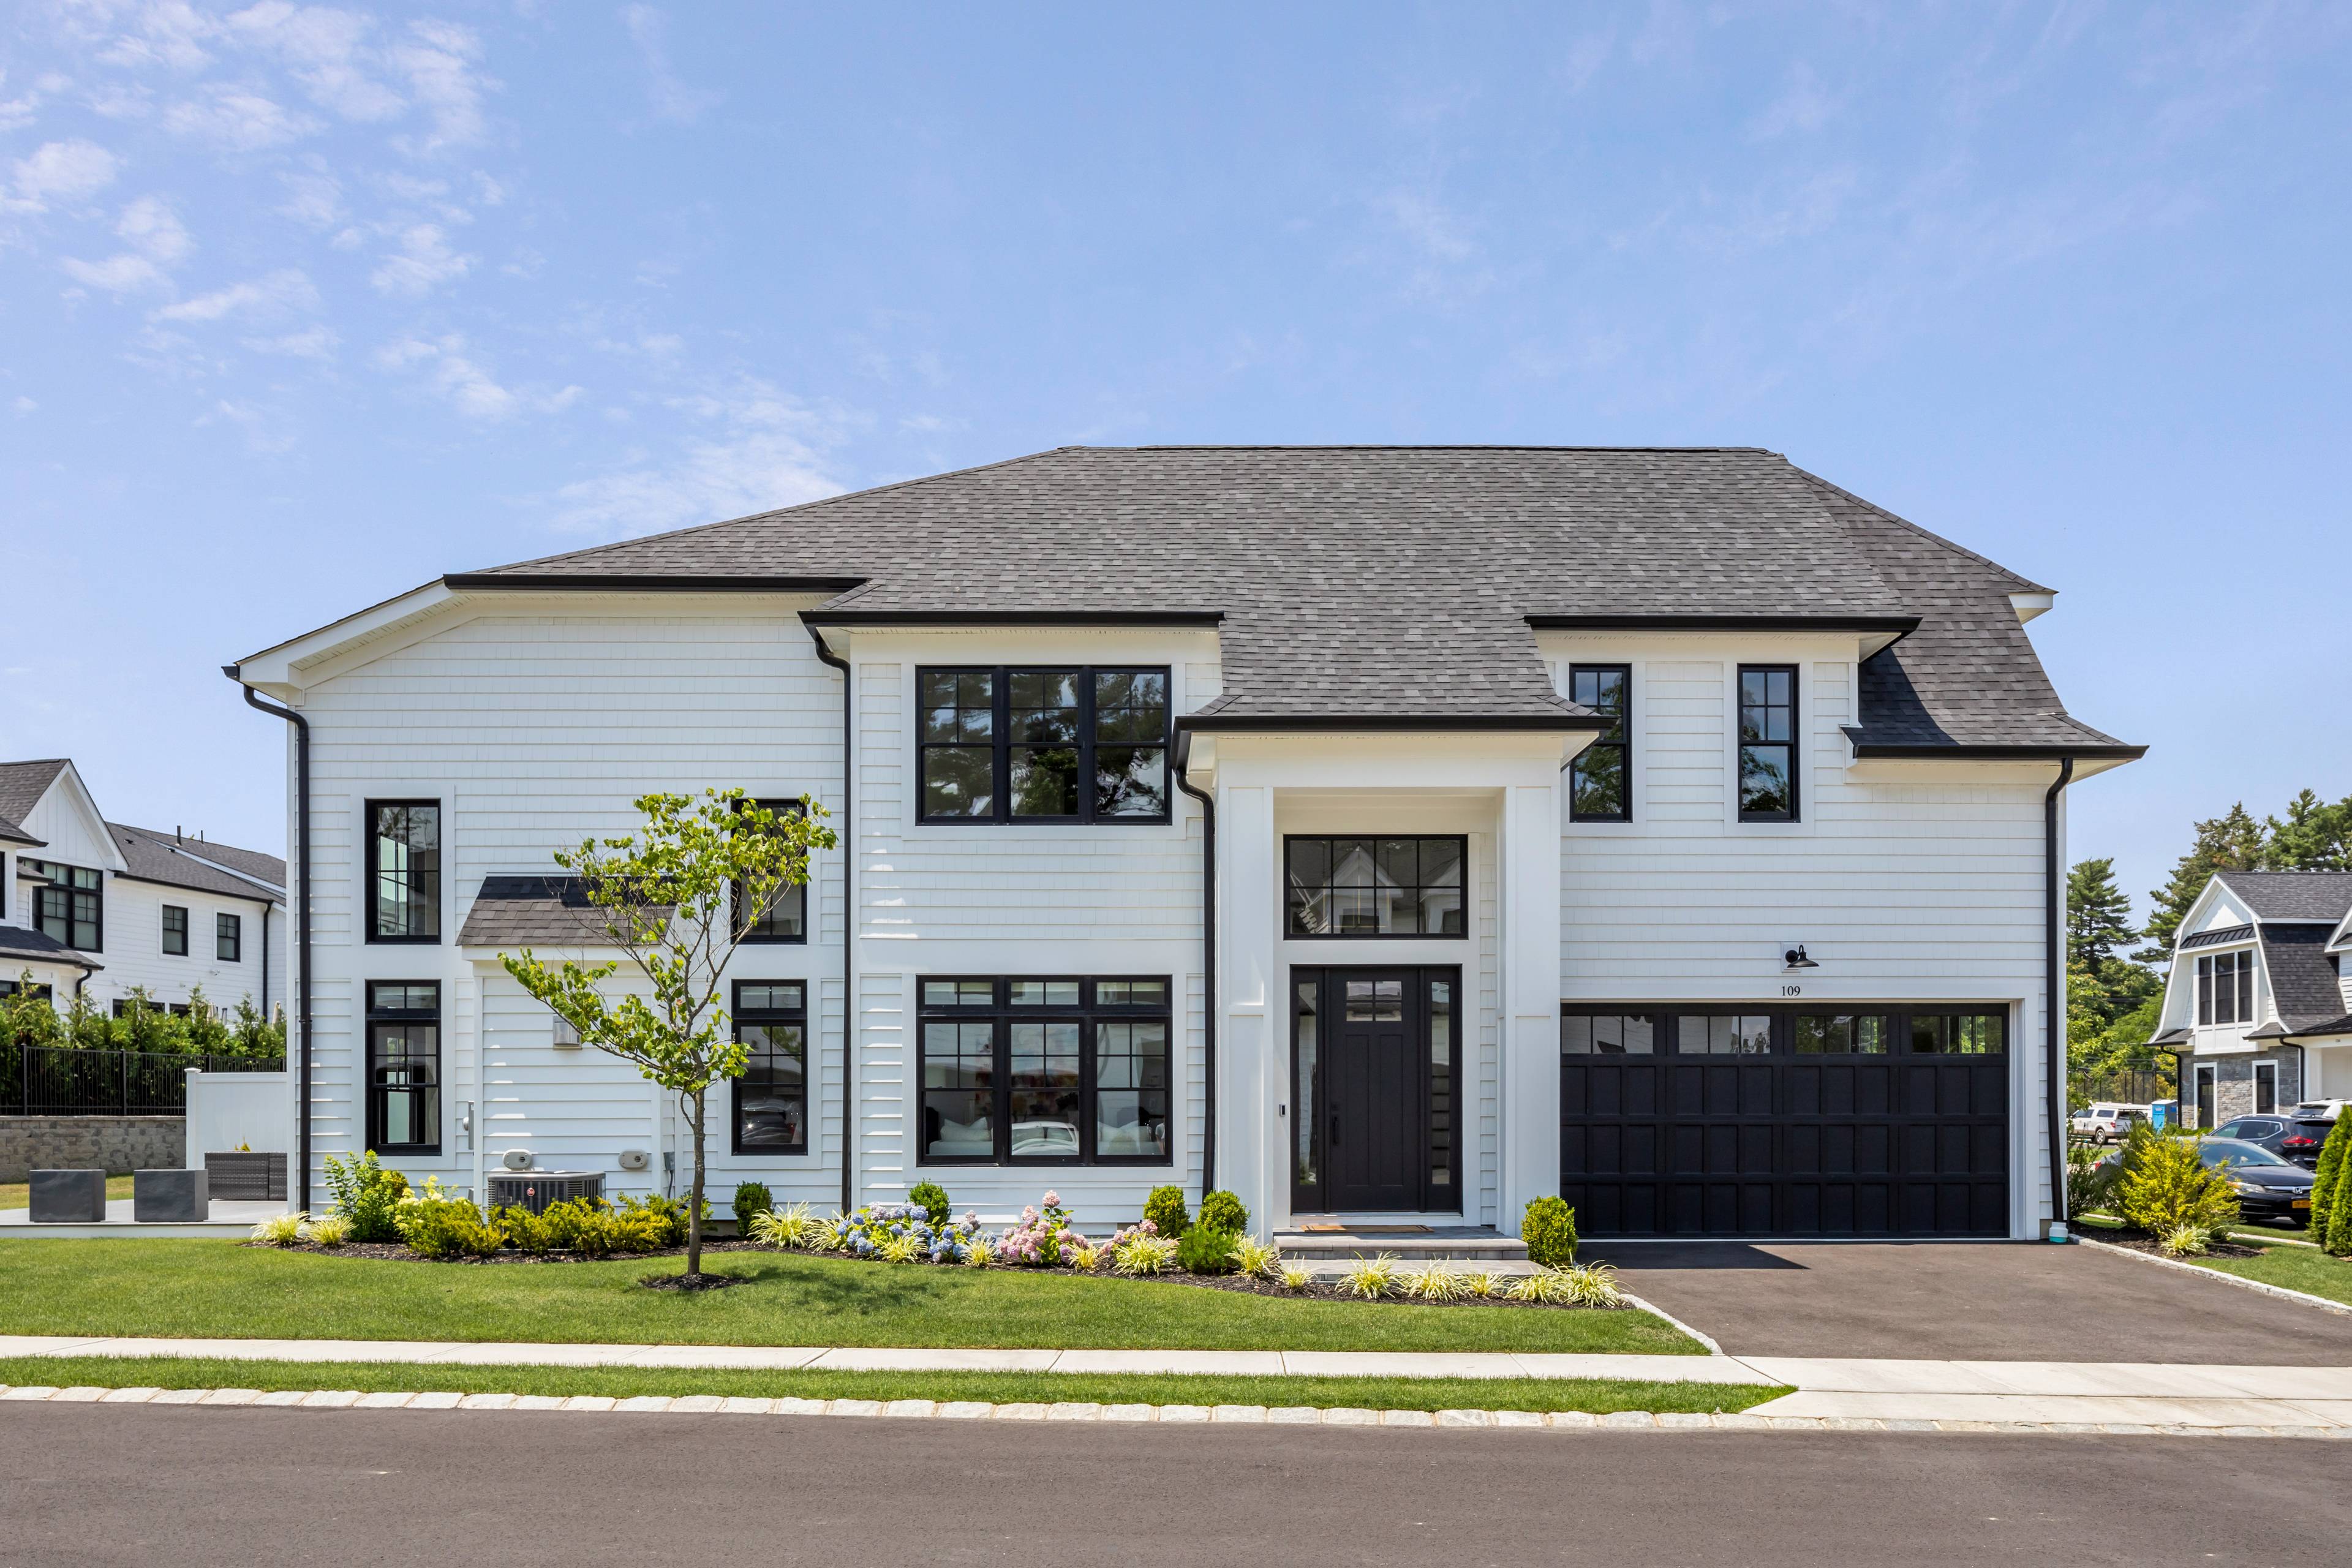 Sparkling Diamond 3 Bedroom, 3.5 Bath End Unit Townhome in 'The Sagamore at Mills Pond'